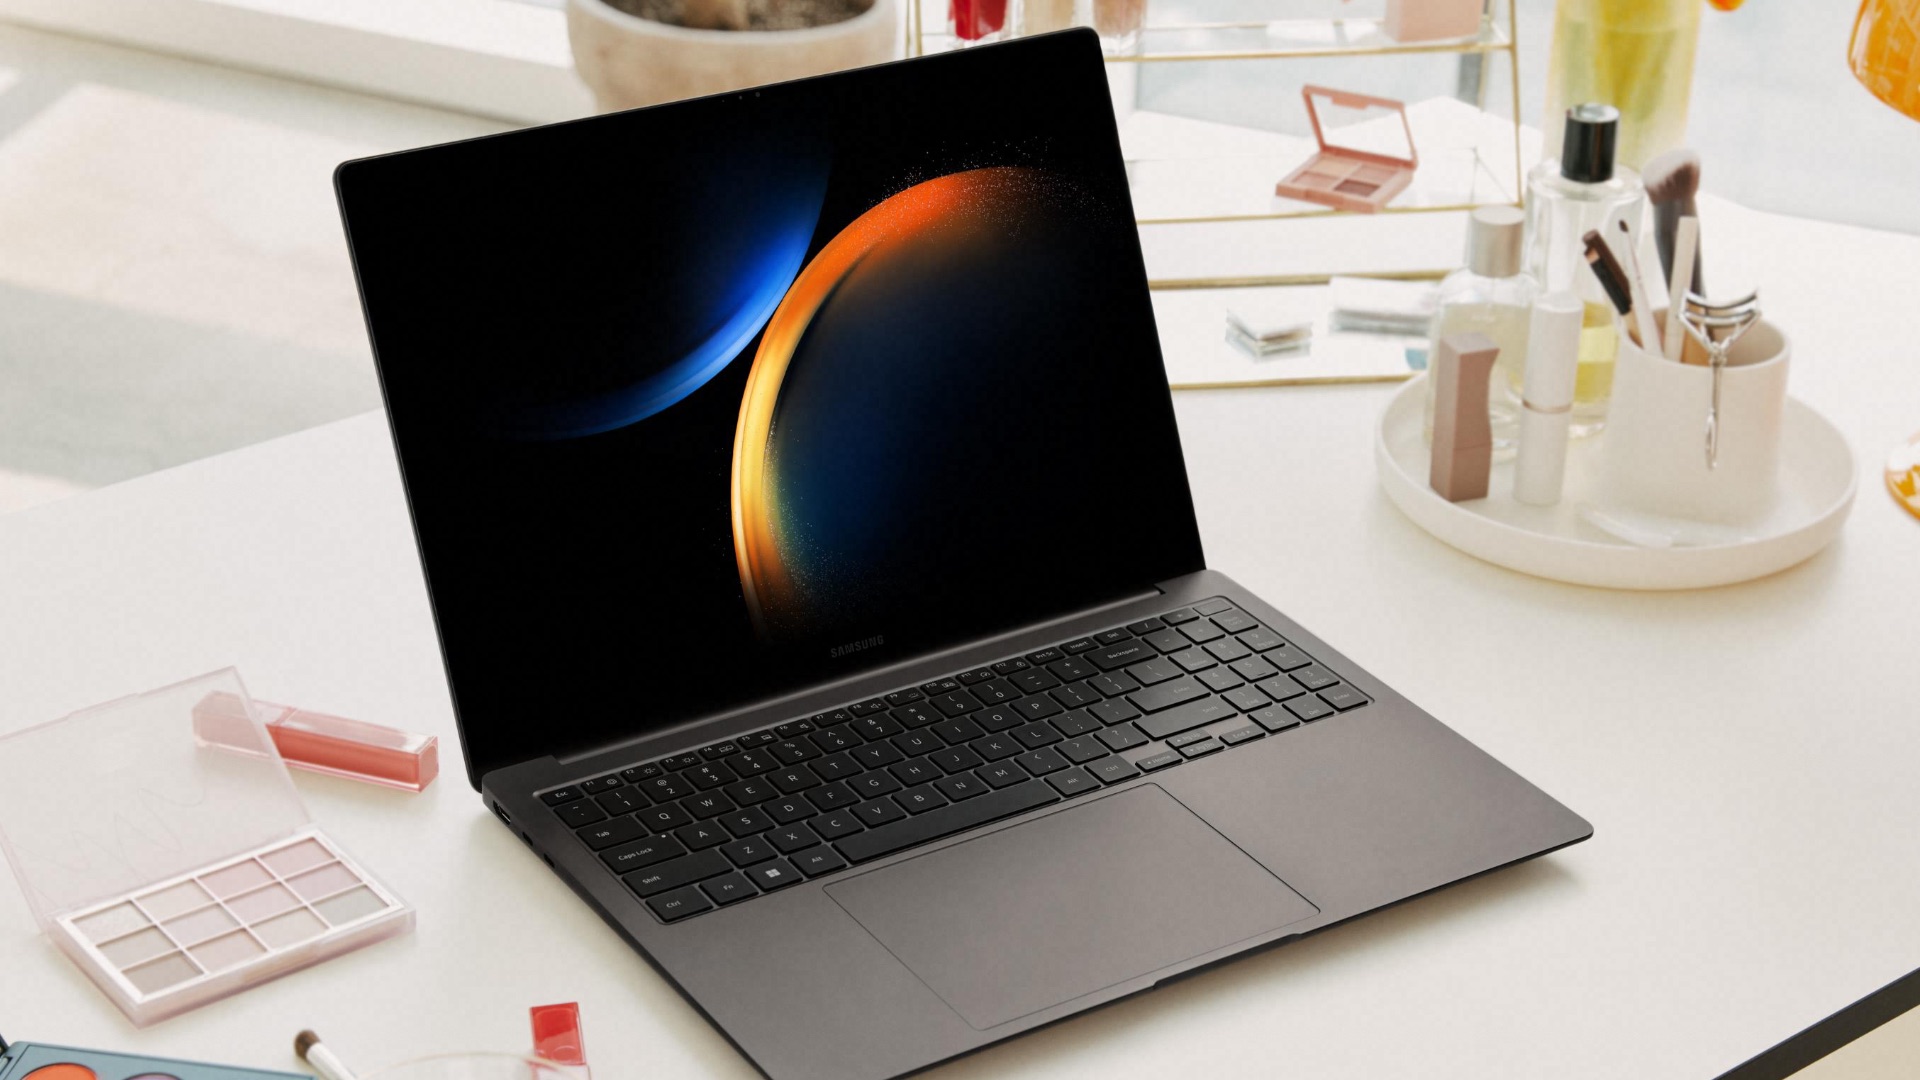 Galaxy Book 3 Ultra launches as Samsung's most ambitious laptop yet - SamMobile